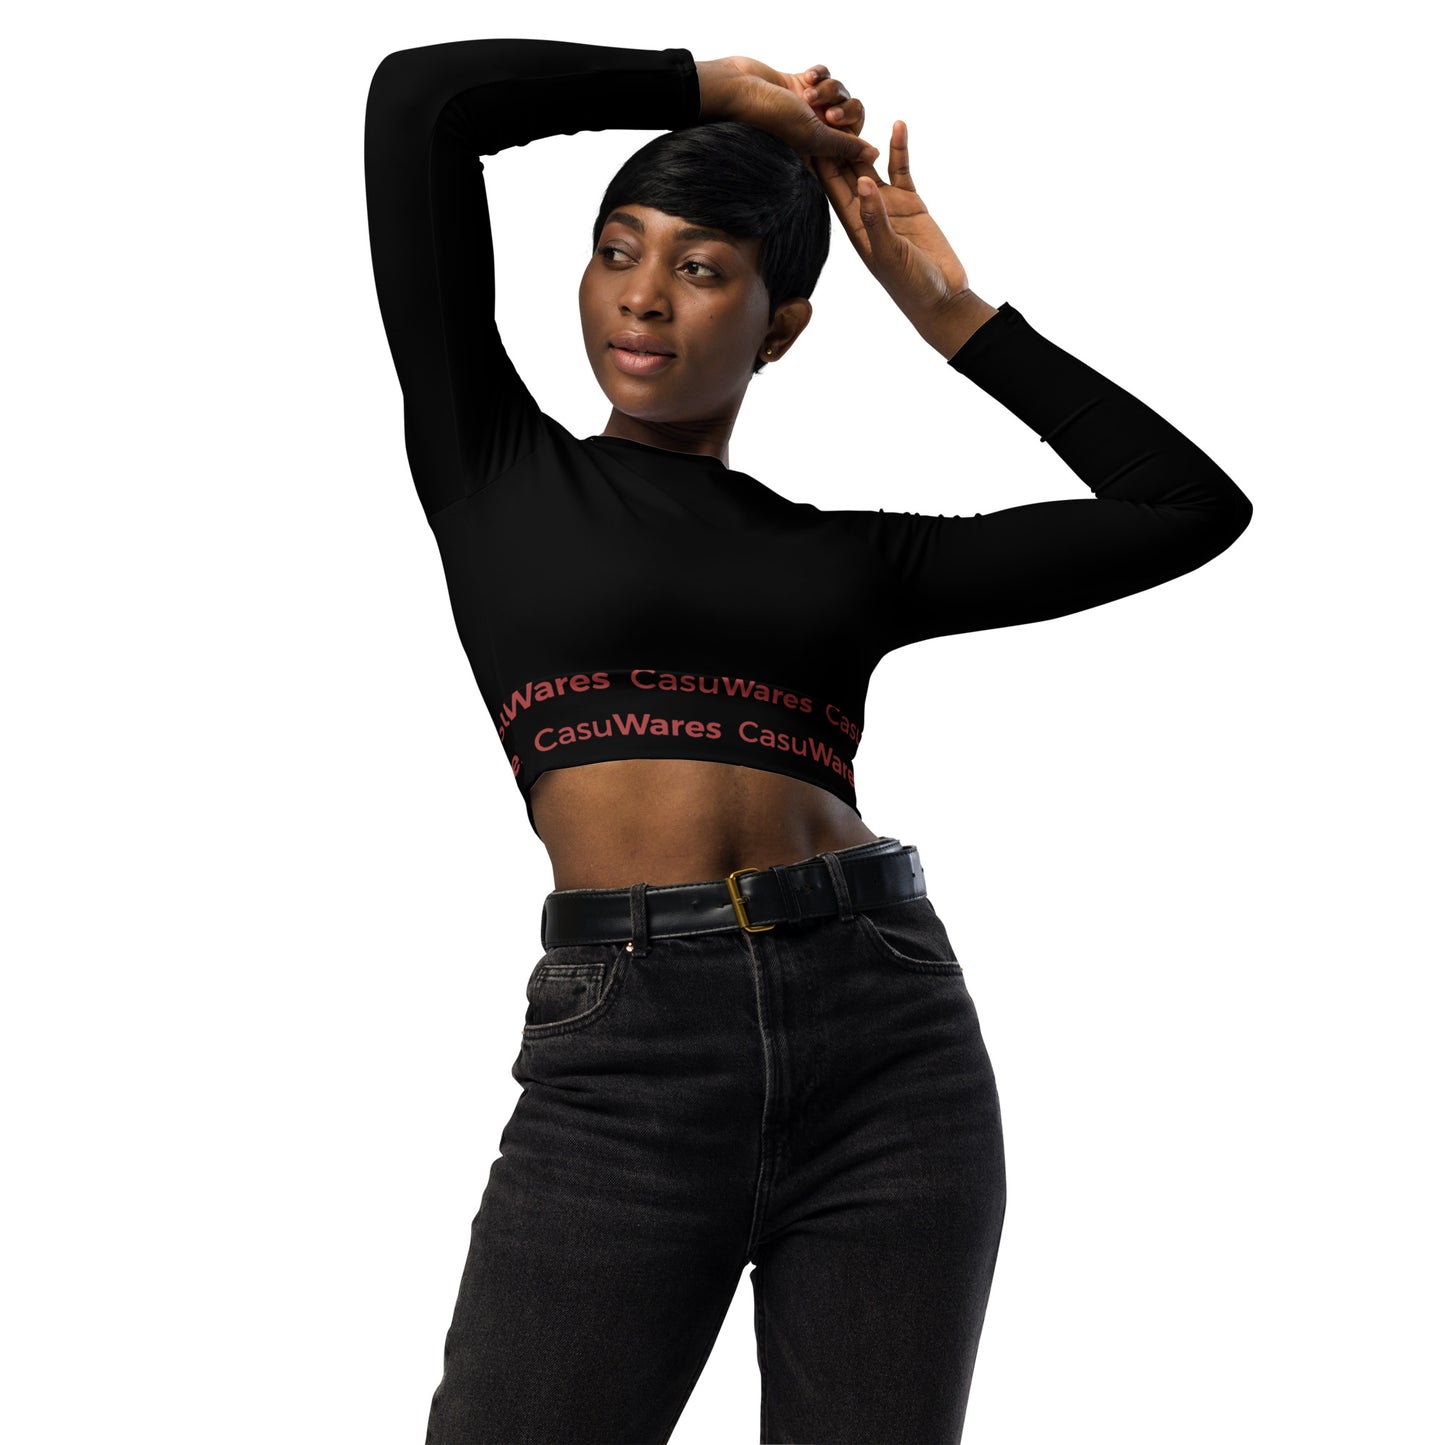 Recycled UPF 50+ long-sleeve crop top